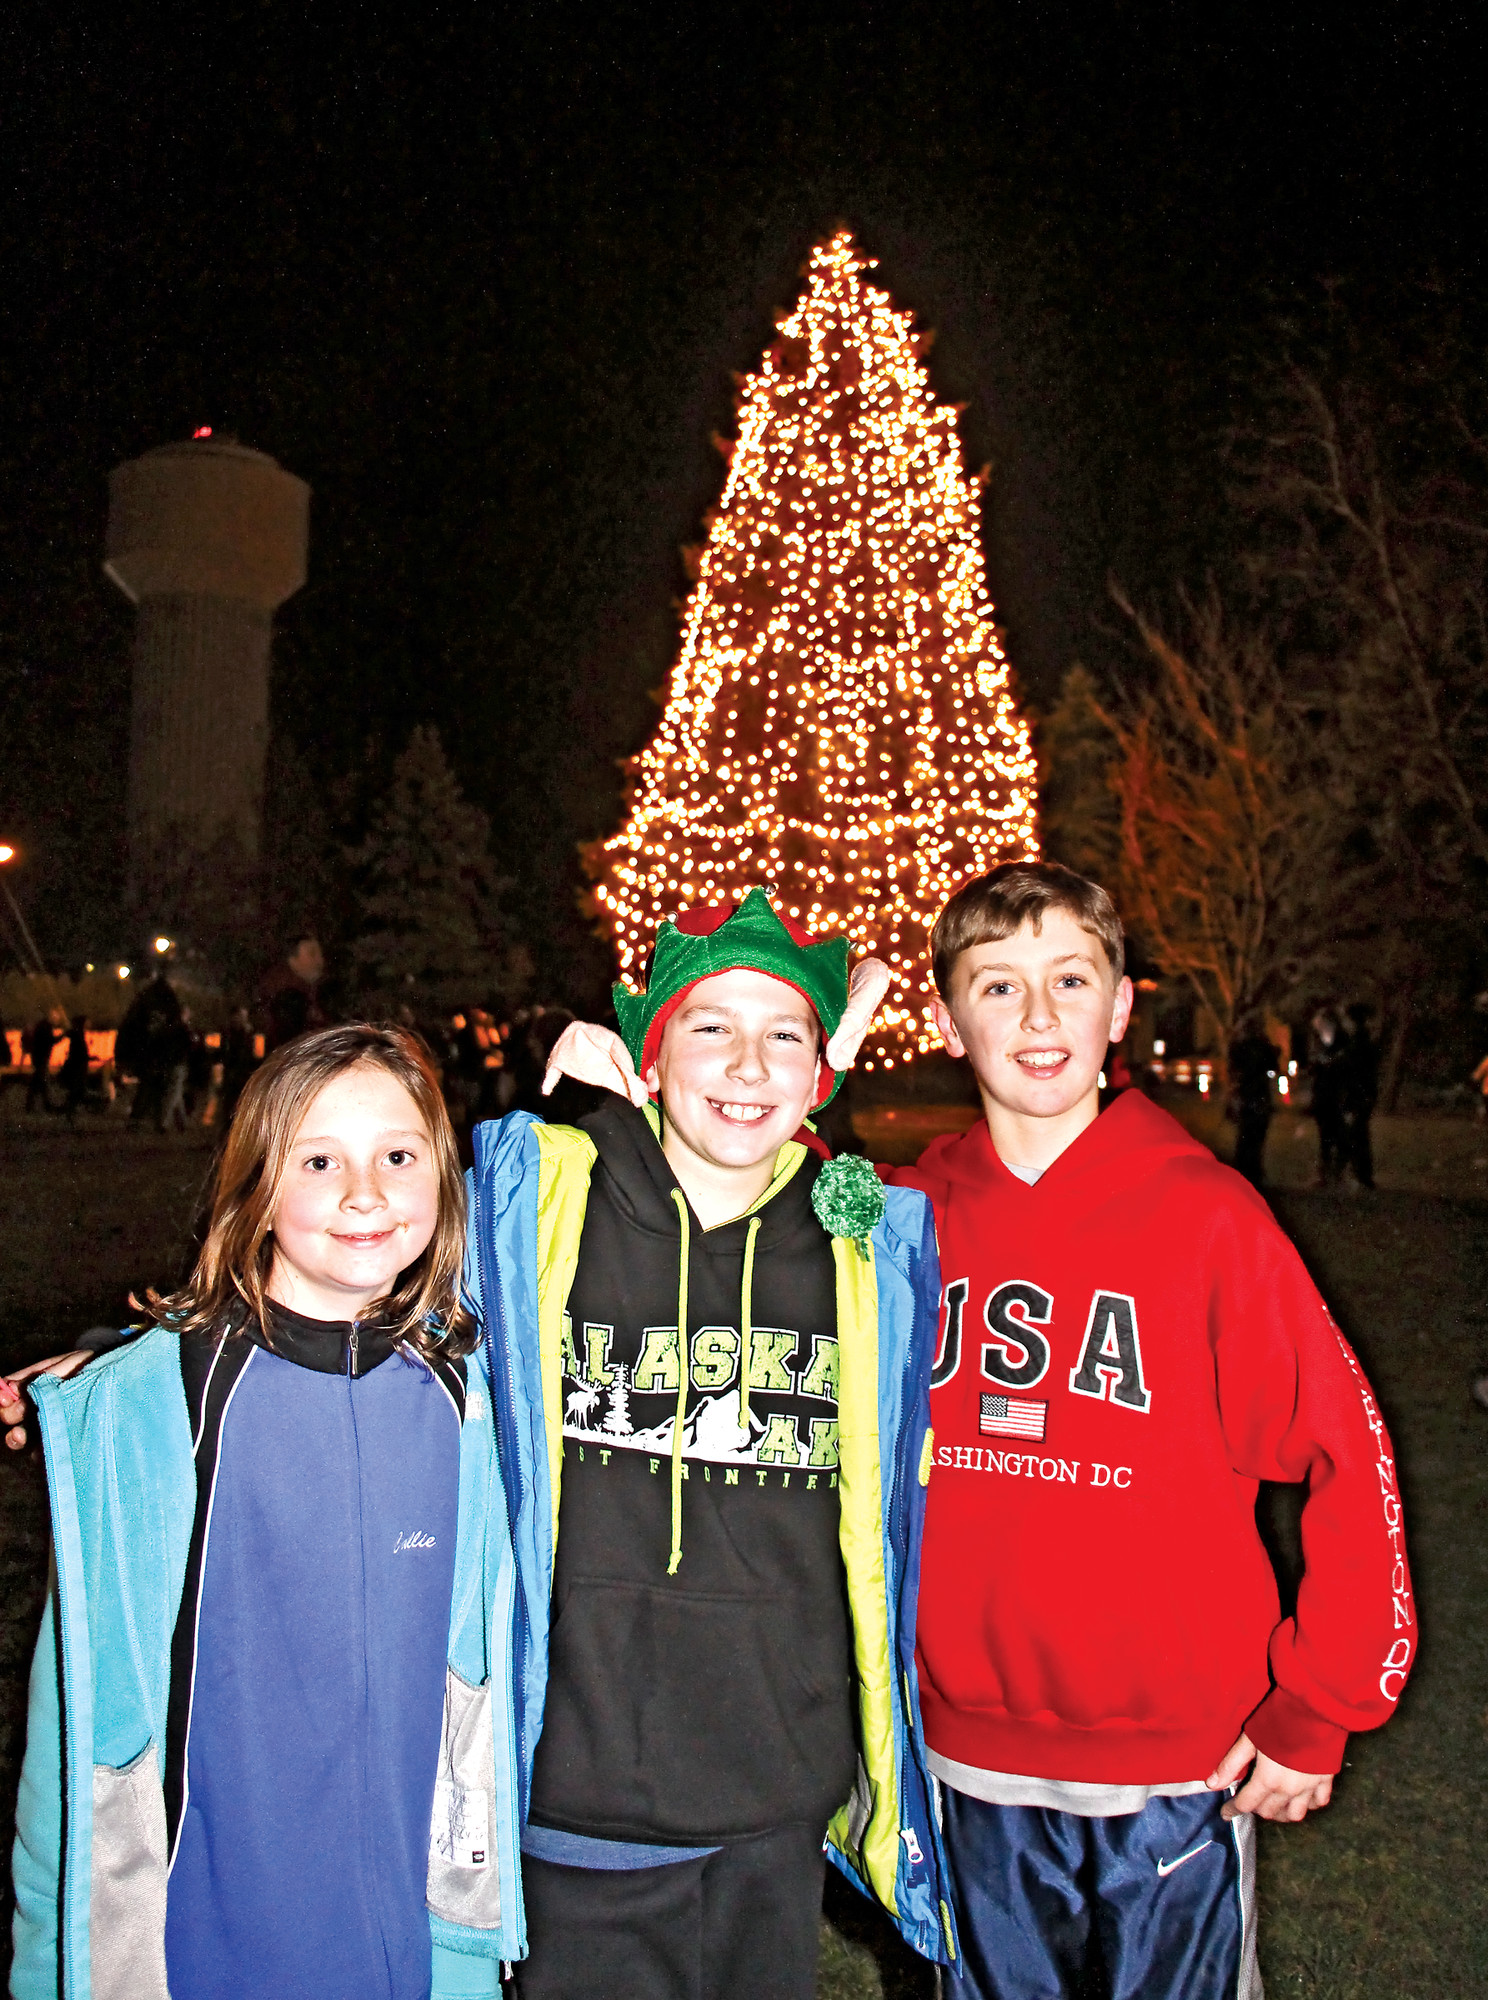 Callie O’Connell, Alex Cerabone and Chris Rosenbaum were in the holiday spirit at the lighting of the Rockville Centre Christmas tree on Dec. 4 on the Village Green. The event also featured entertainment and a visit from Santa.